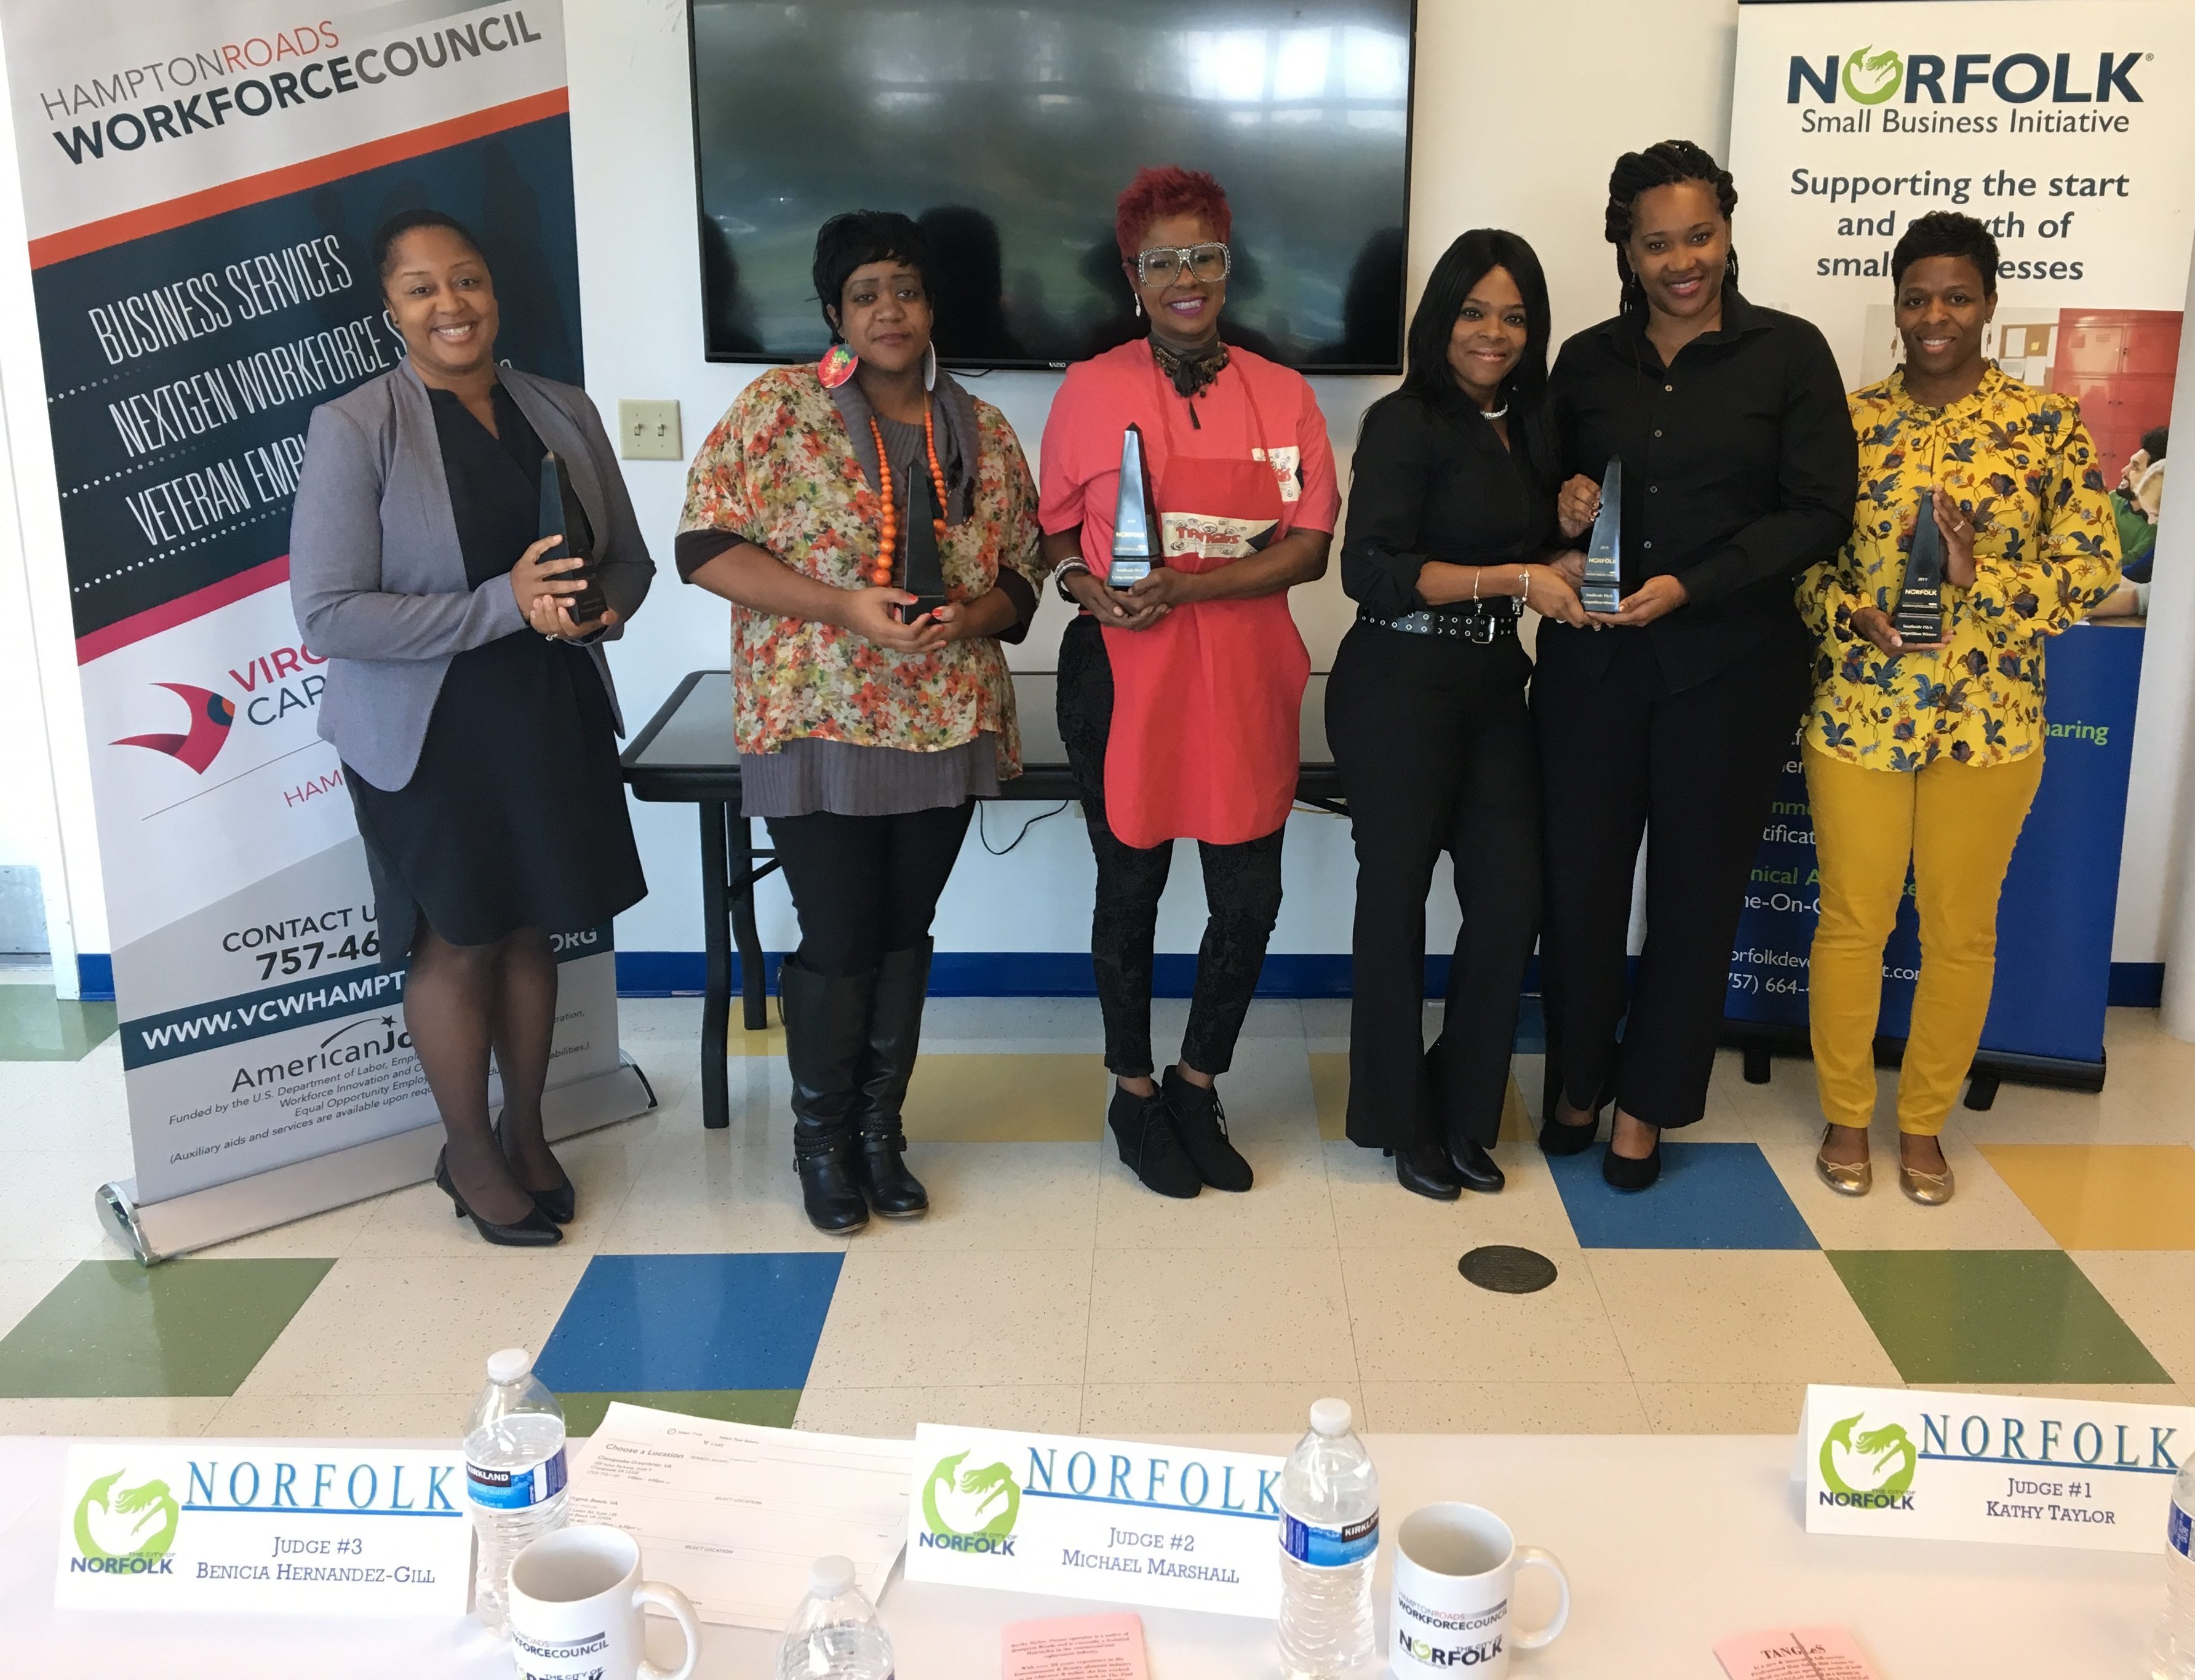 Winners of the Southside Pitch Competition Announced $8500 awarded to Norfolk small businesses in partnership with City of Norfolk, Hampton Roads Workforce Council and the SunTrust Foundation